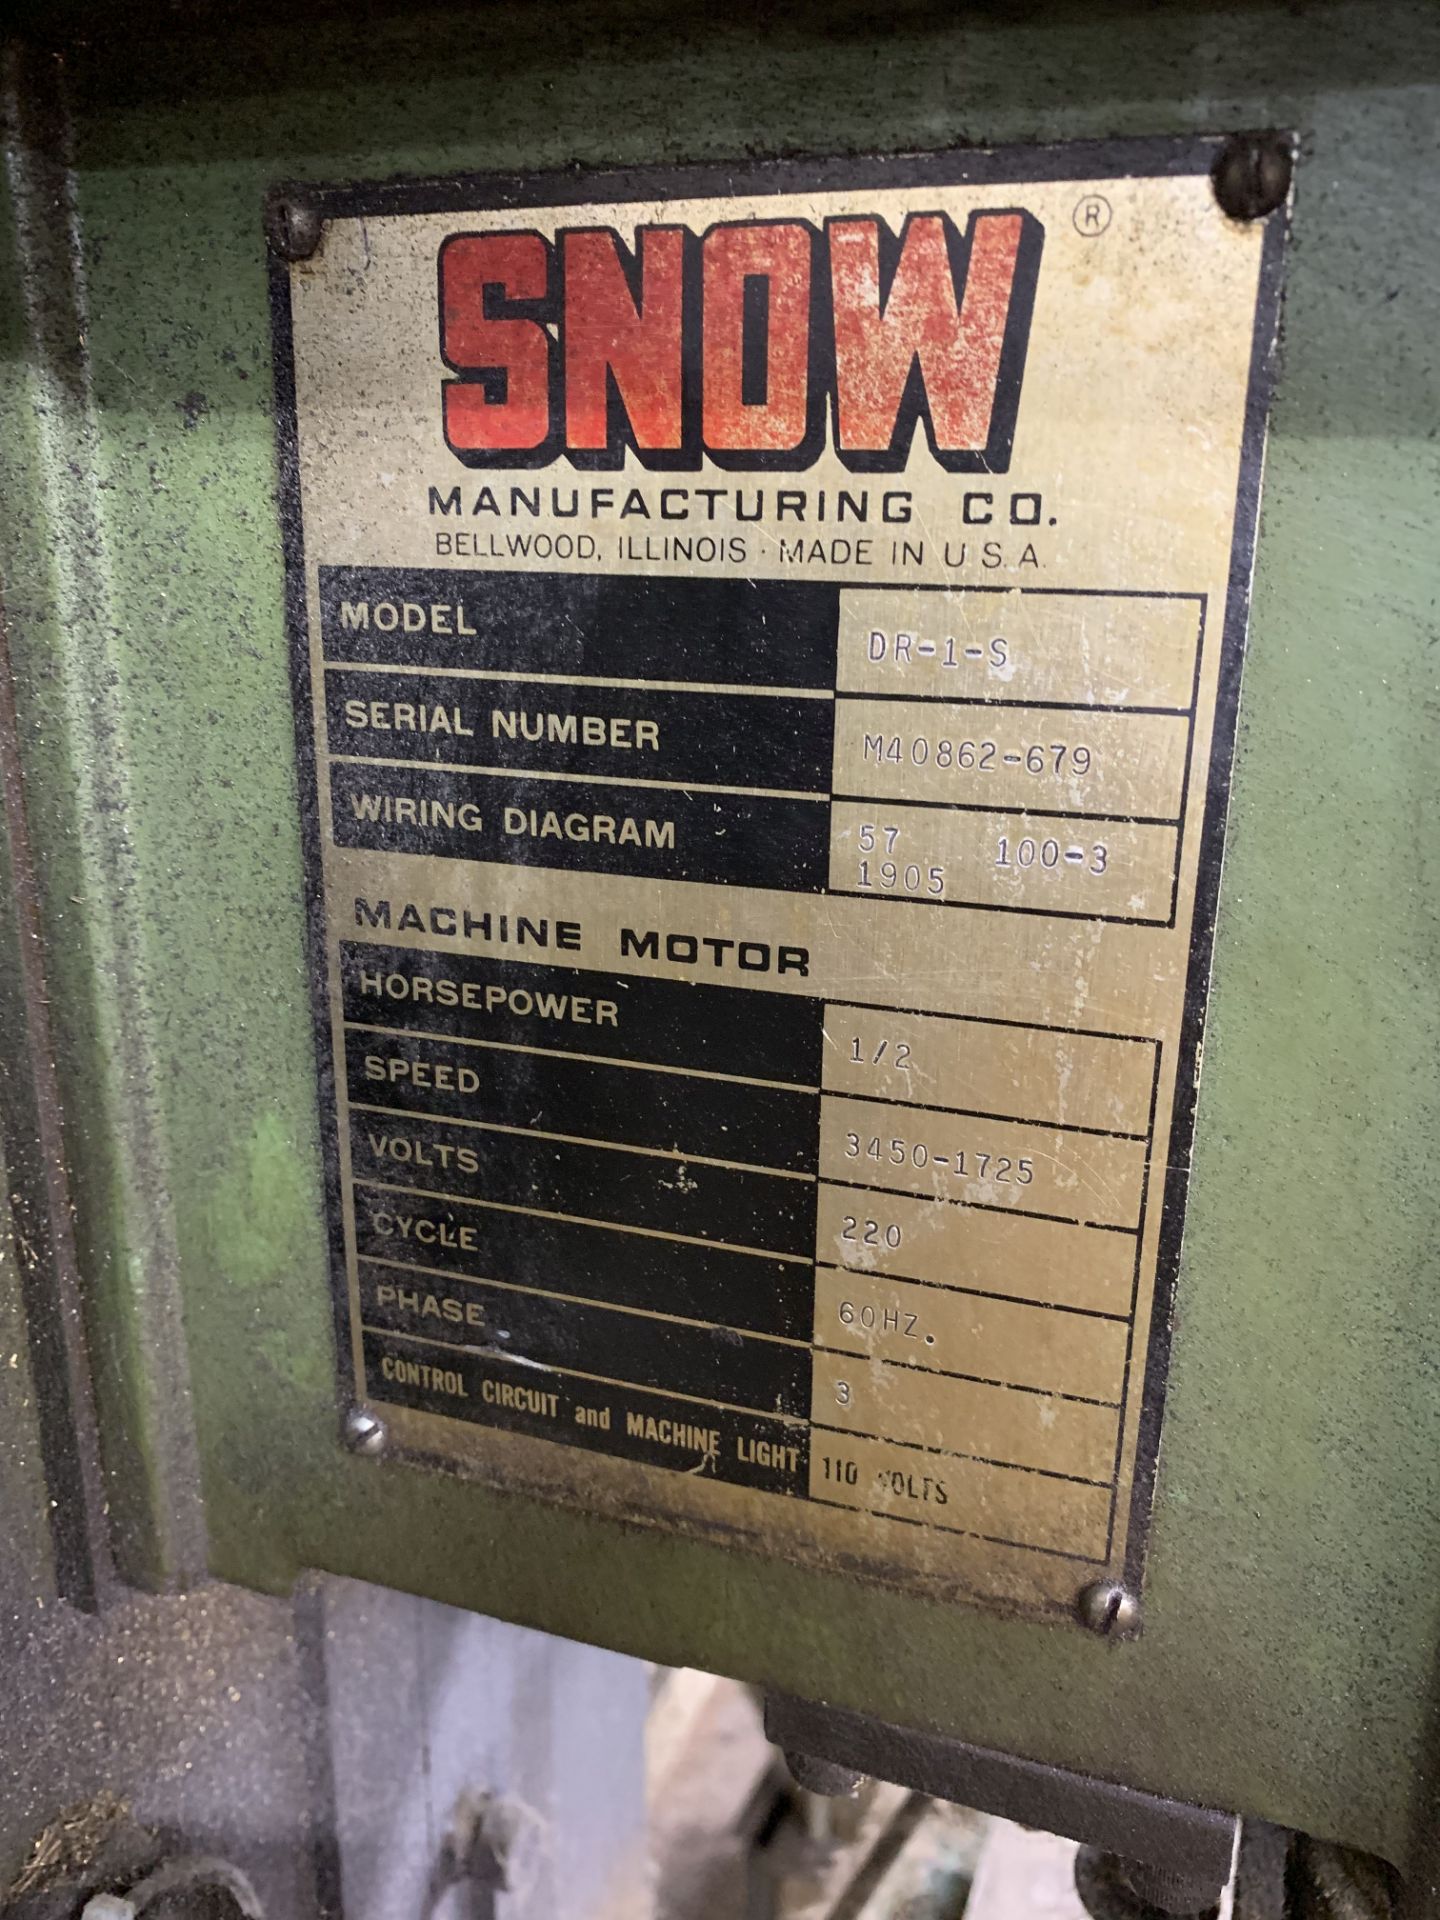 16" SNOW MODEL DR-1-S SINGLE SPINDLE FLOOR DRILL **OUT OF SERVICE** - Image 2 of 2